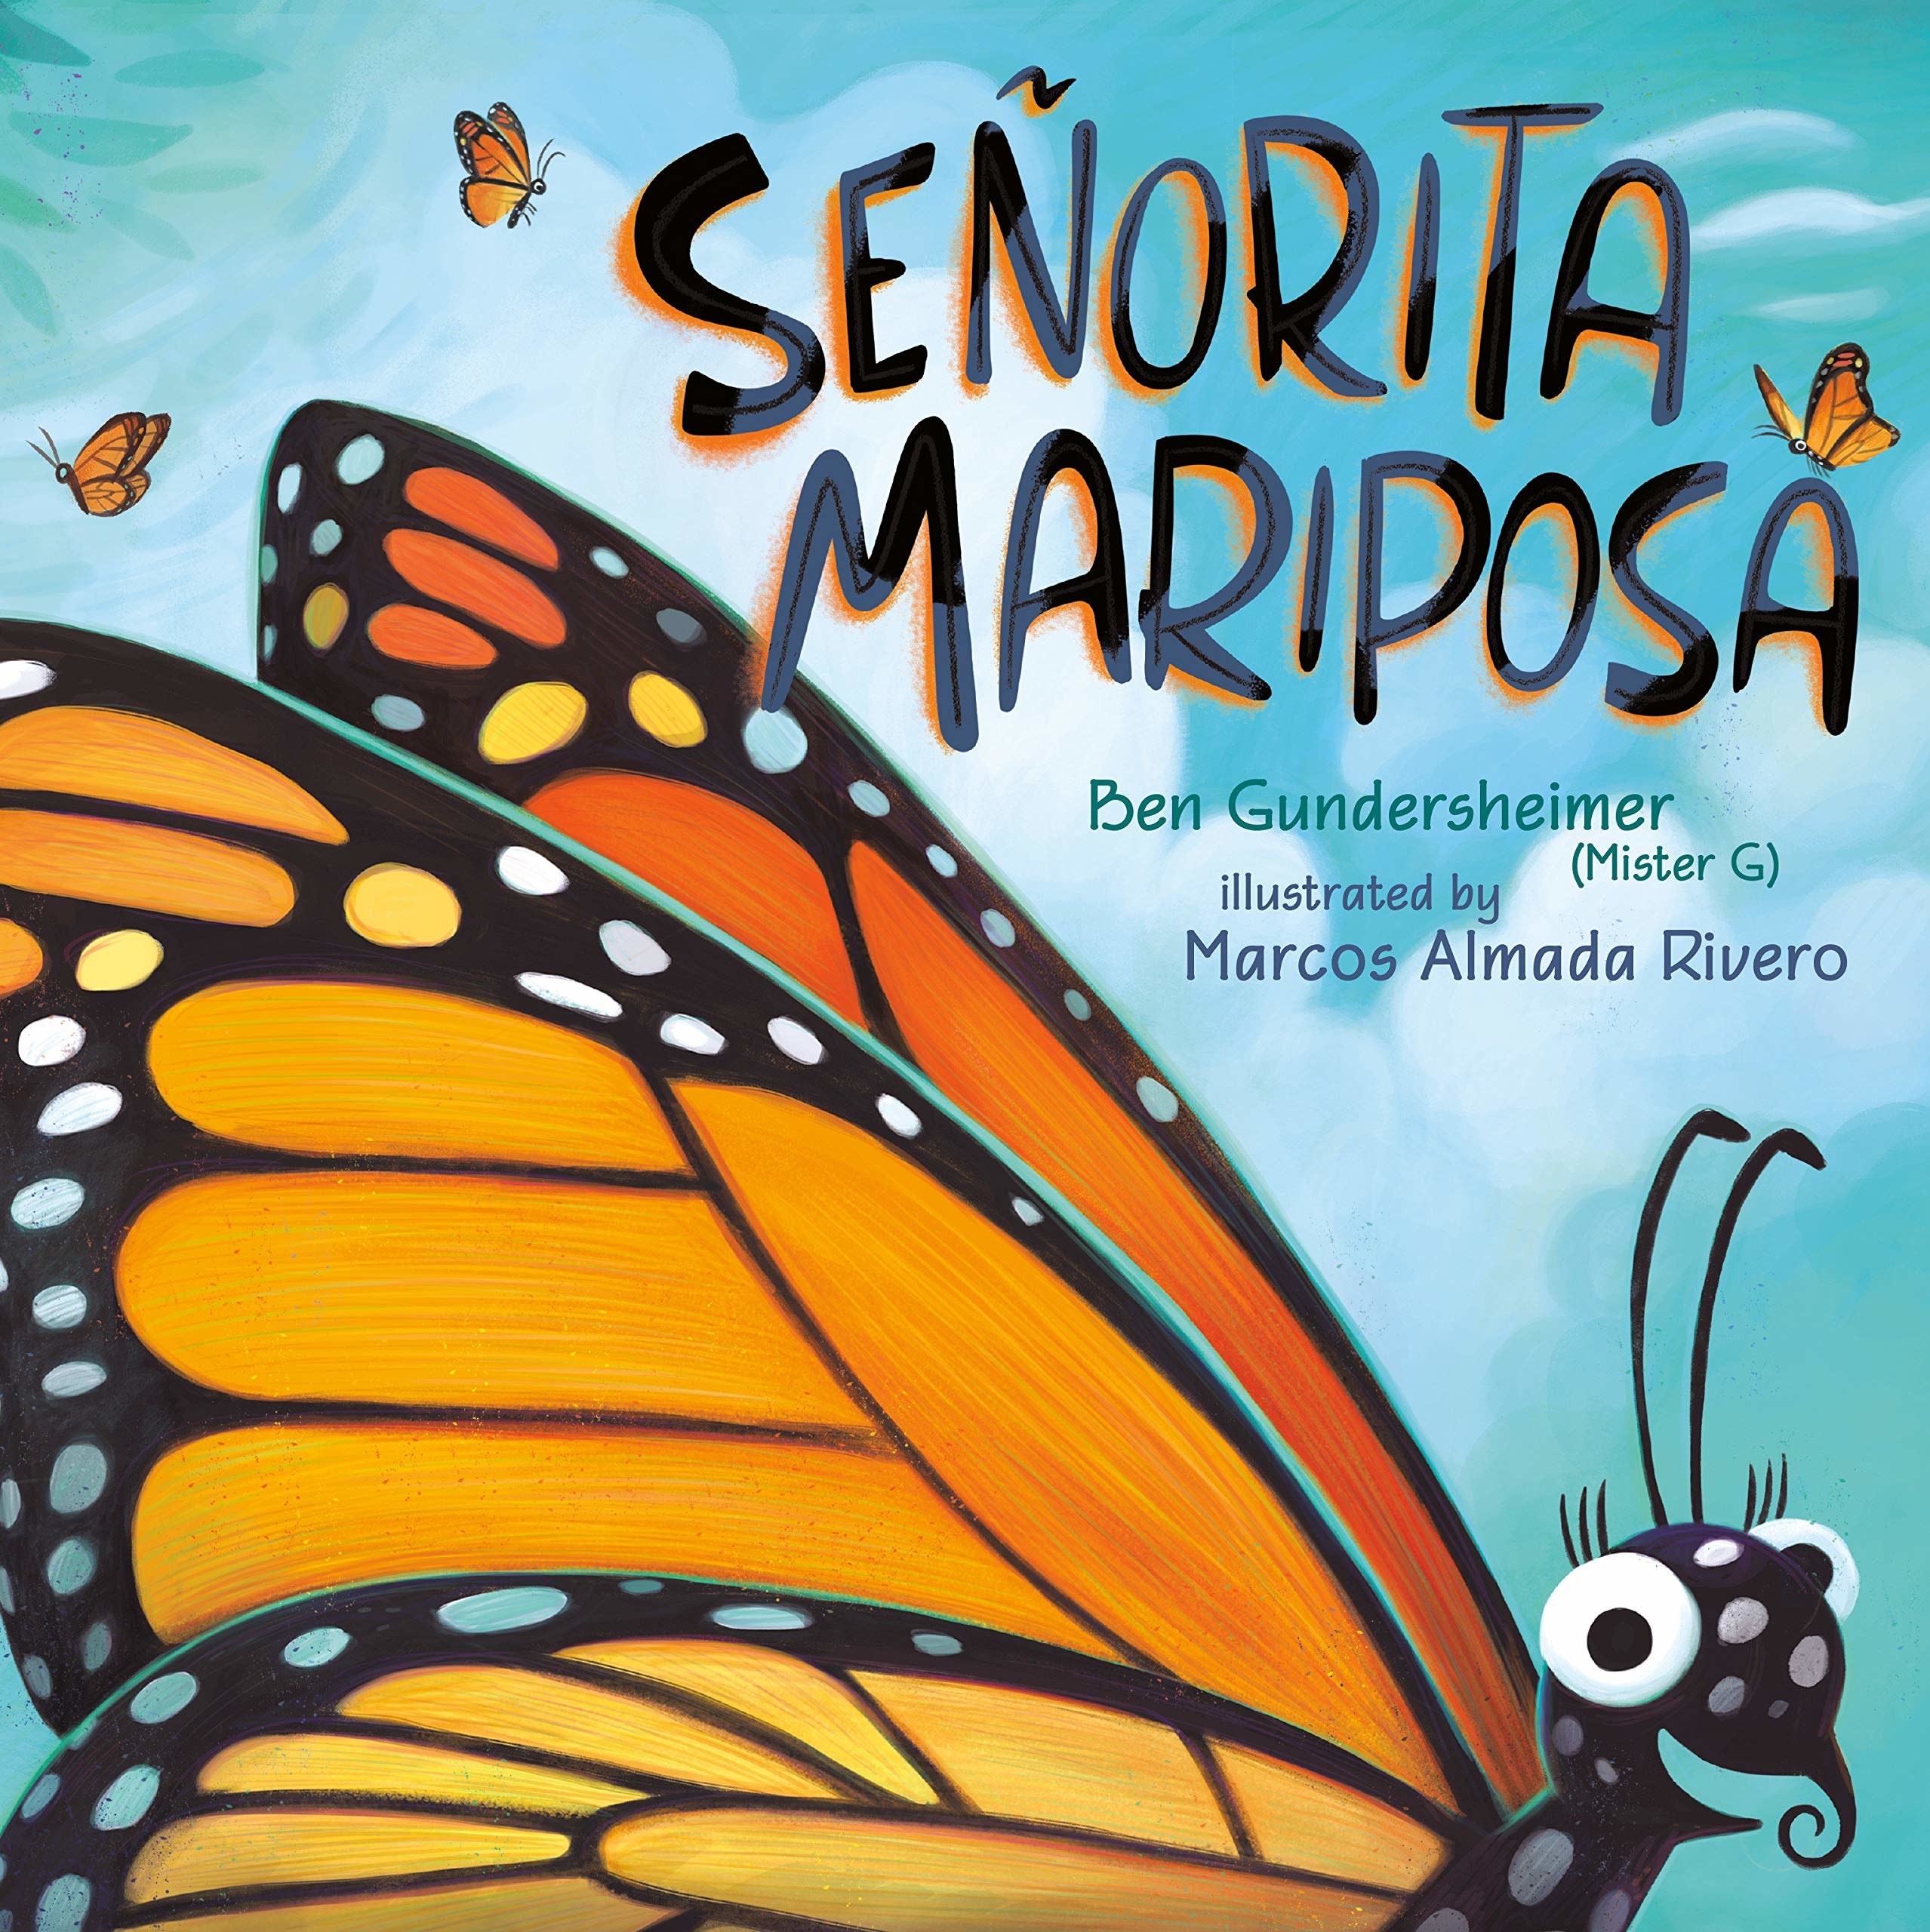 a large illustrated butterfly on the book cover